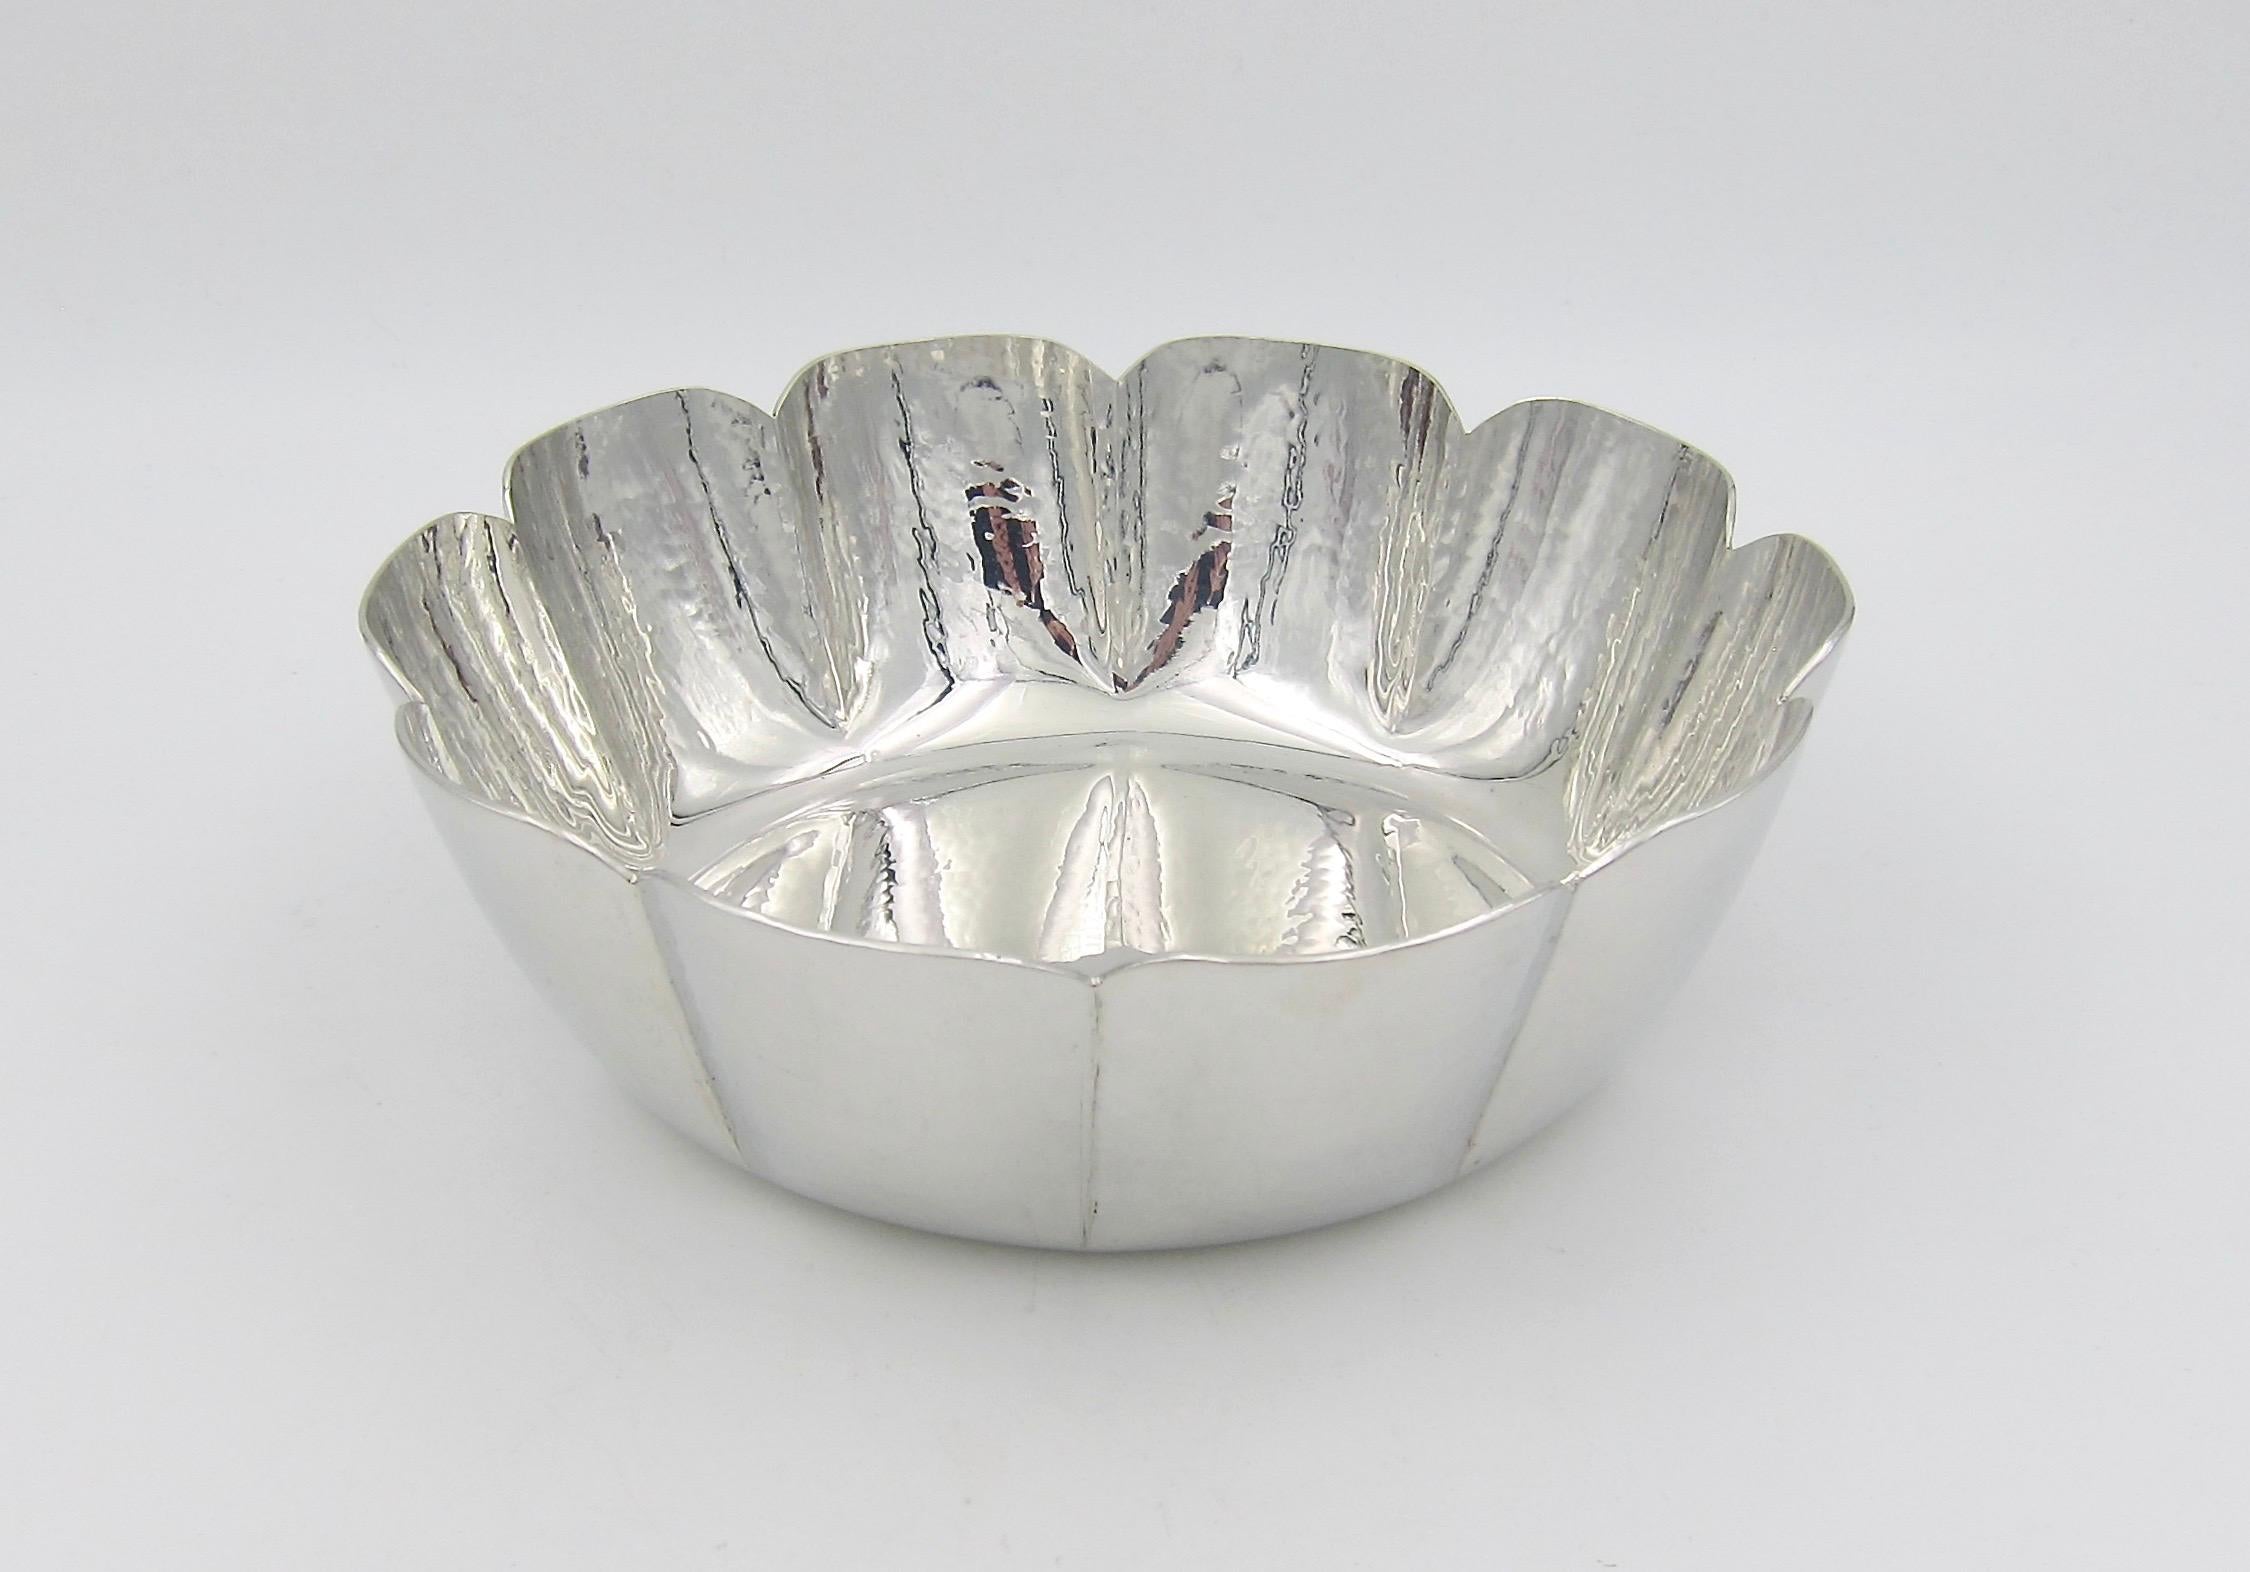 A vintage Cartier bowl handcrafted of polished pewter with a hammered surface dating to the 1980s. The elegant lobed design in highly reflective silver metal has fluted edges flaring outward to a scalloped rim, measures: 7.75 in diameter (at